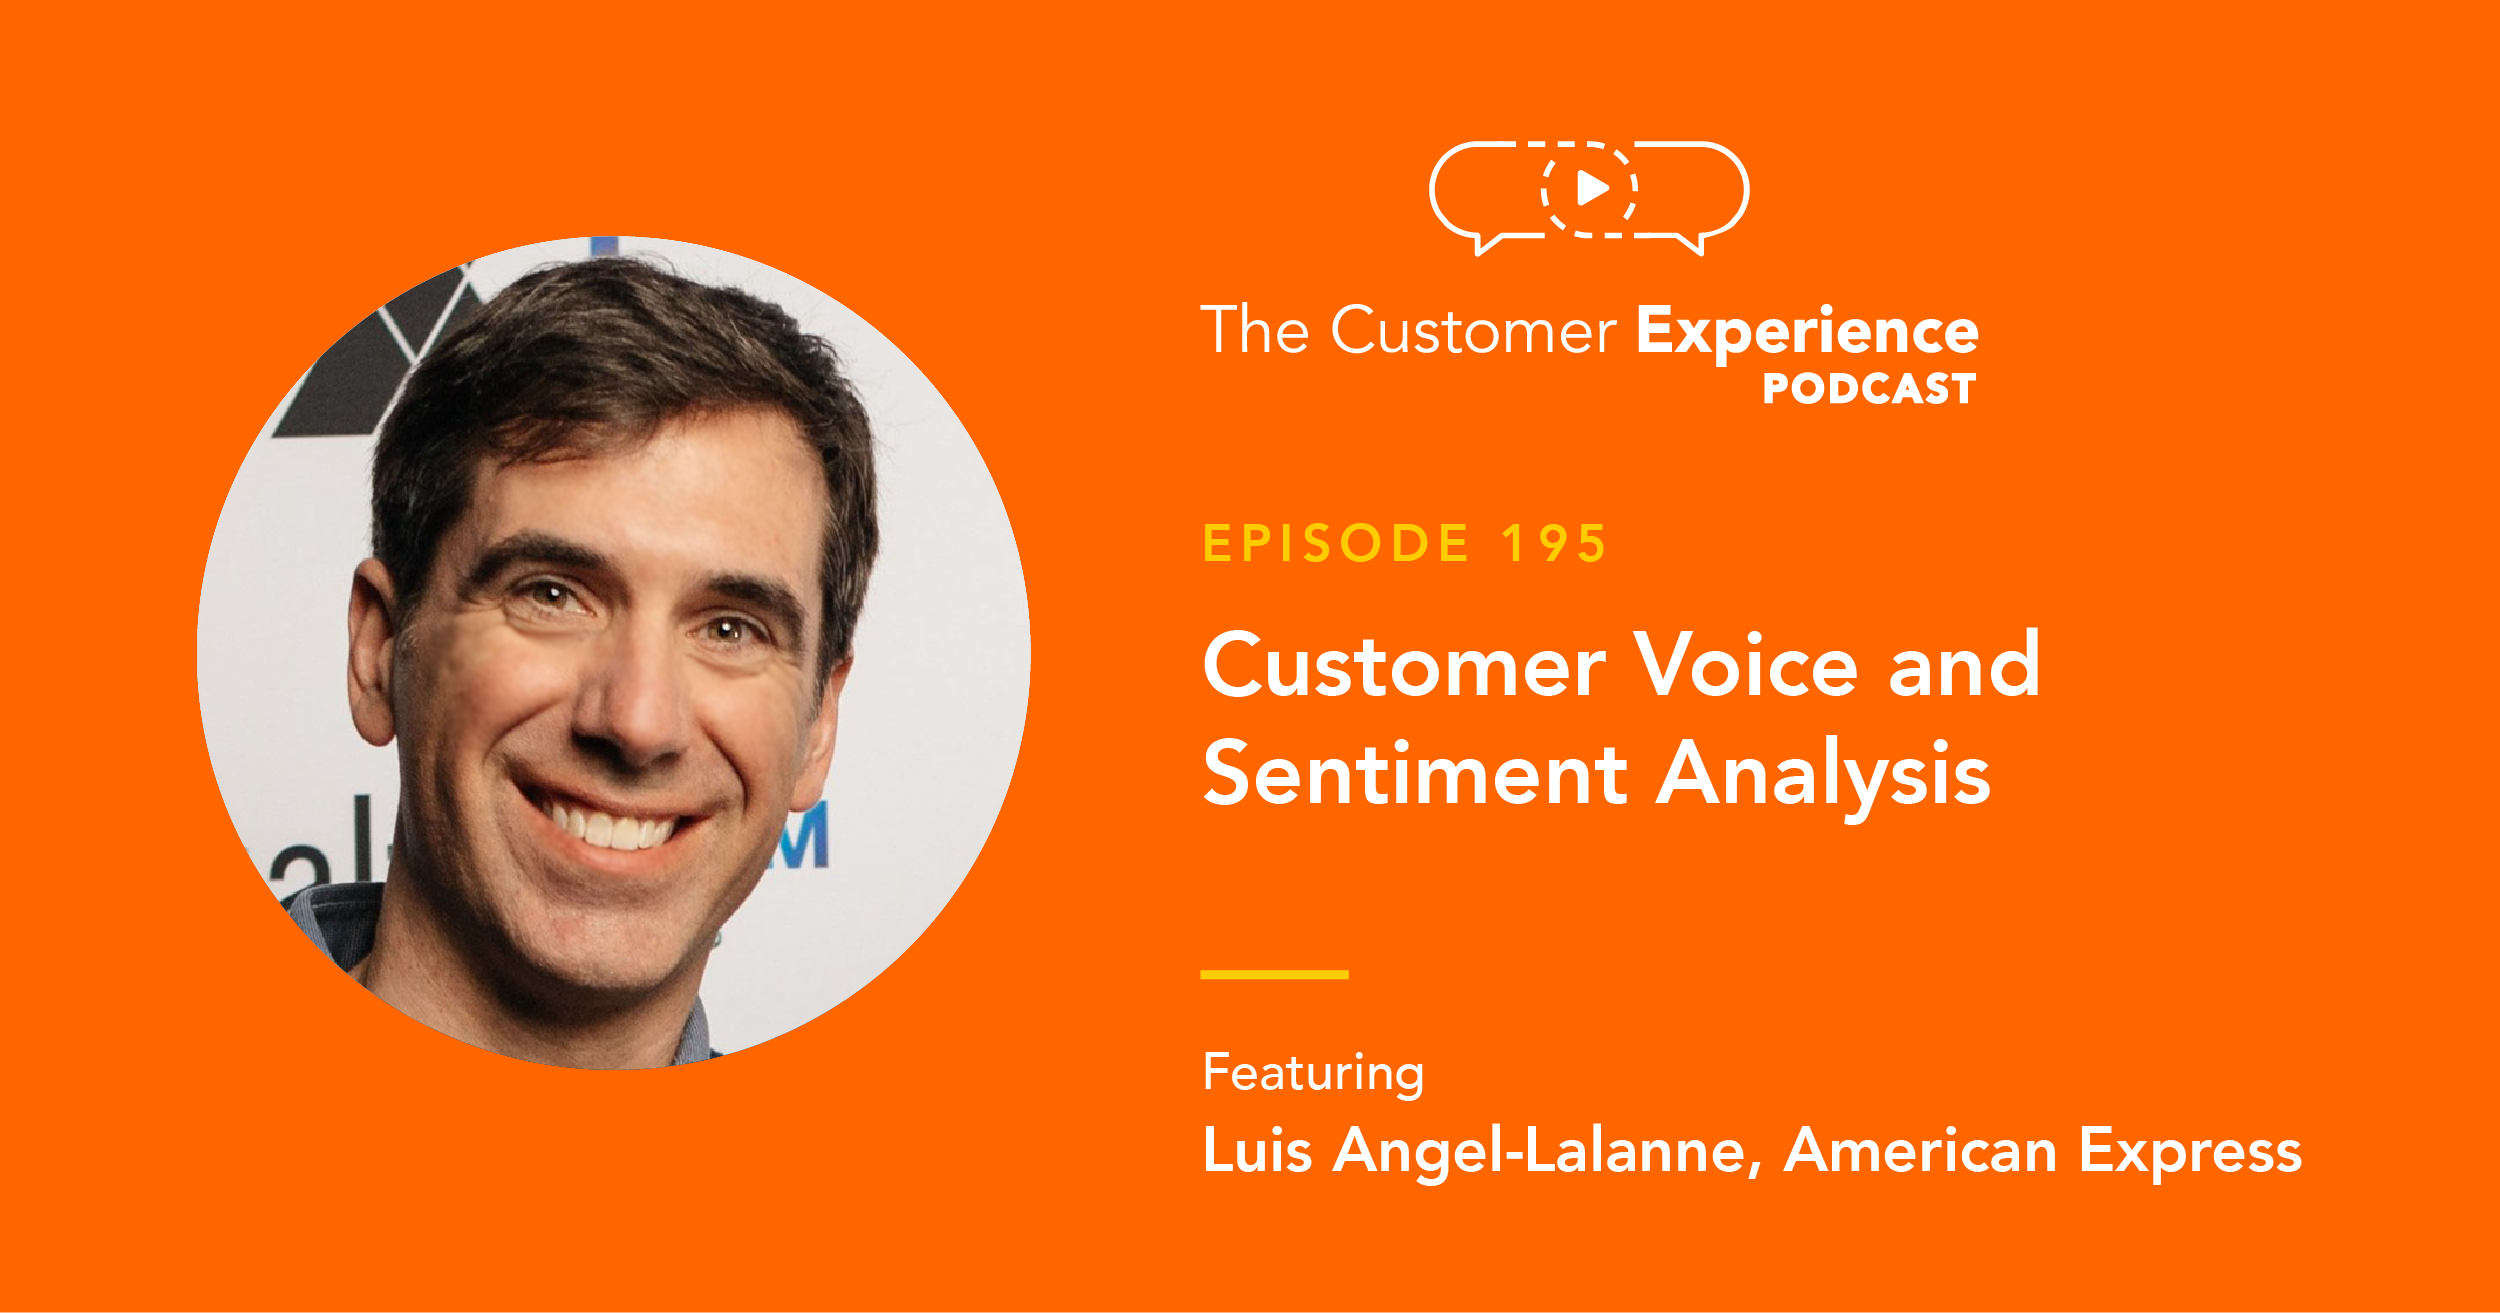 Luis Angel-Lalanne, Vice President, Customer Voice, American Express, sentiment analysis, The Customer Experience Podcast, customer sentiment, natural language processing, NLP, data analysis, data collection, survey data